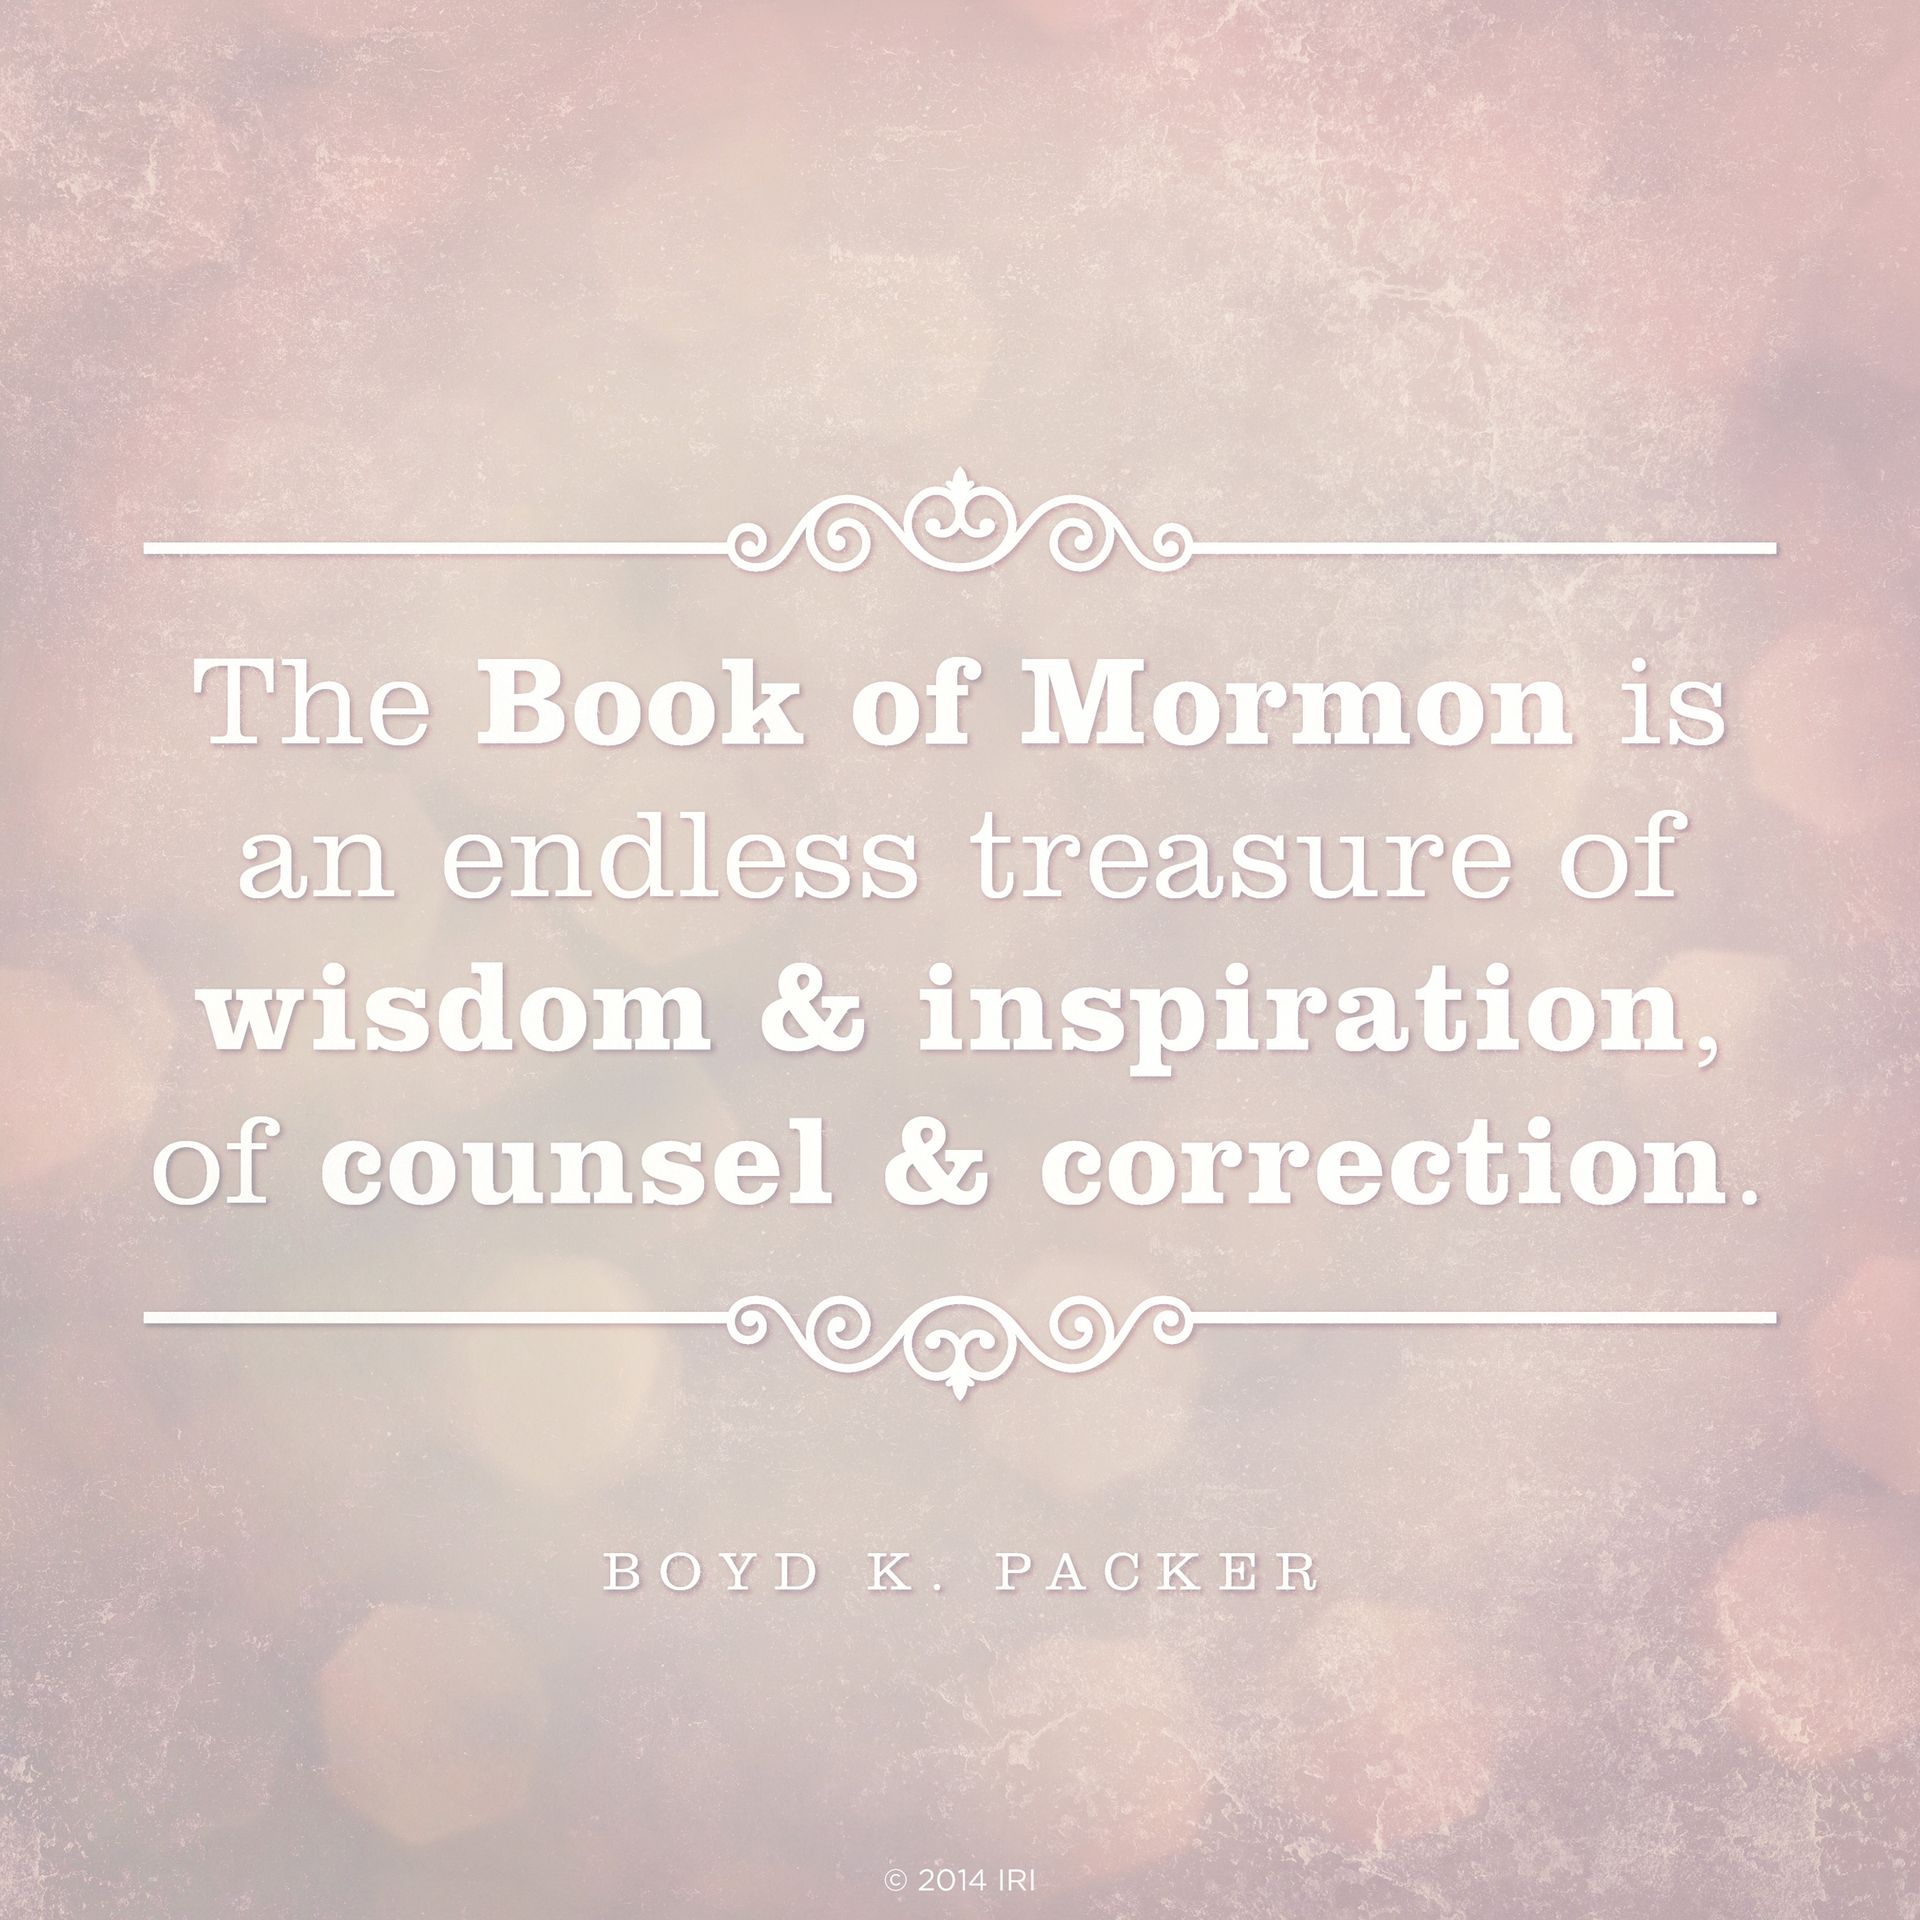 “The Book of Mormon is an endless treasure of wisdom and inspiration, of counsel and correction.” —President Boyd K. Packer, “The Book of Mormon: Another Testament of Jesus Christ—Plain and Precious Things”